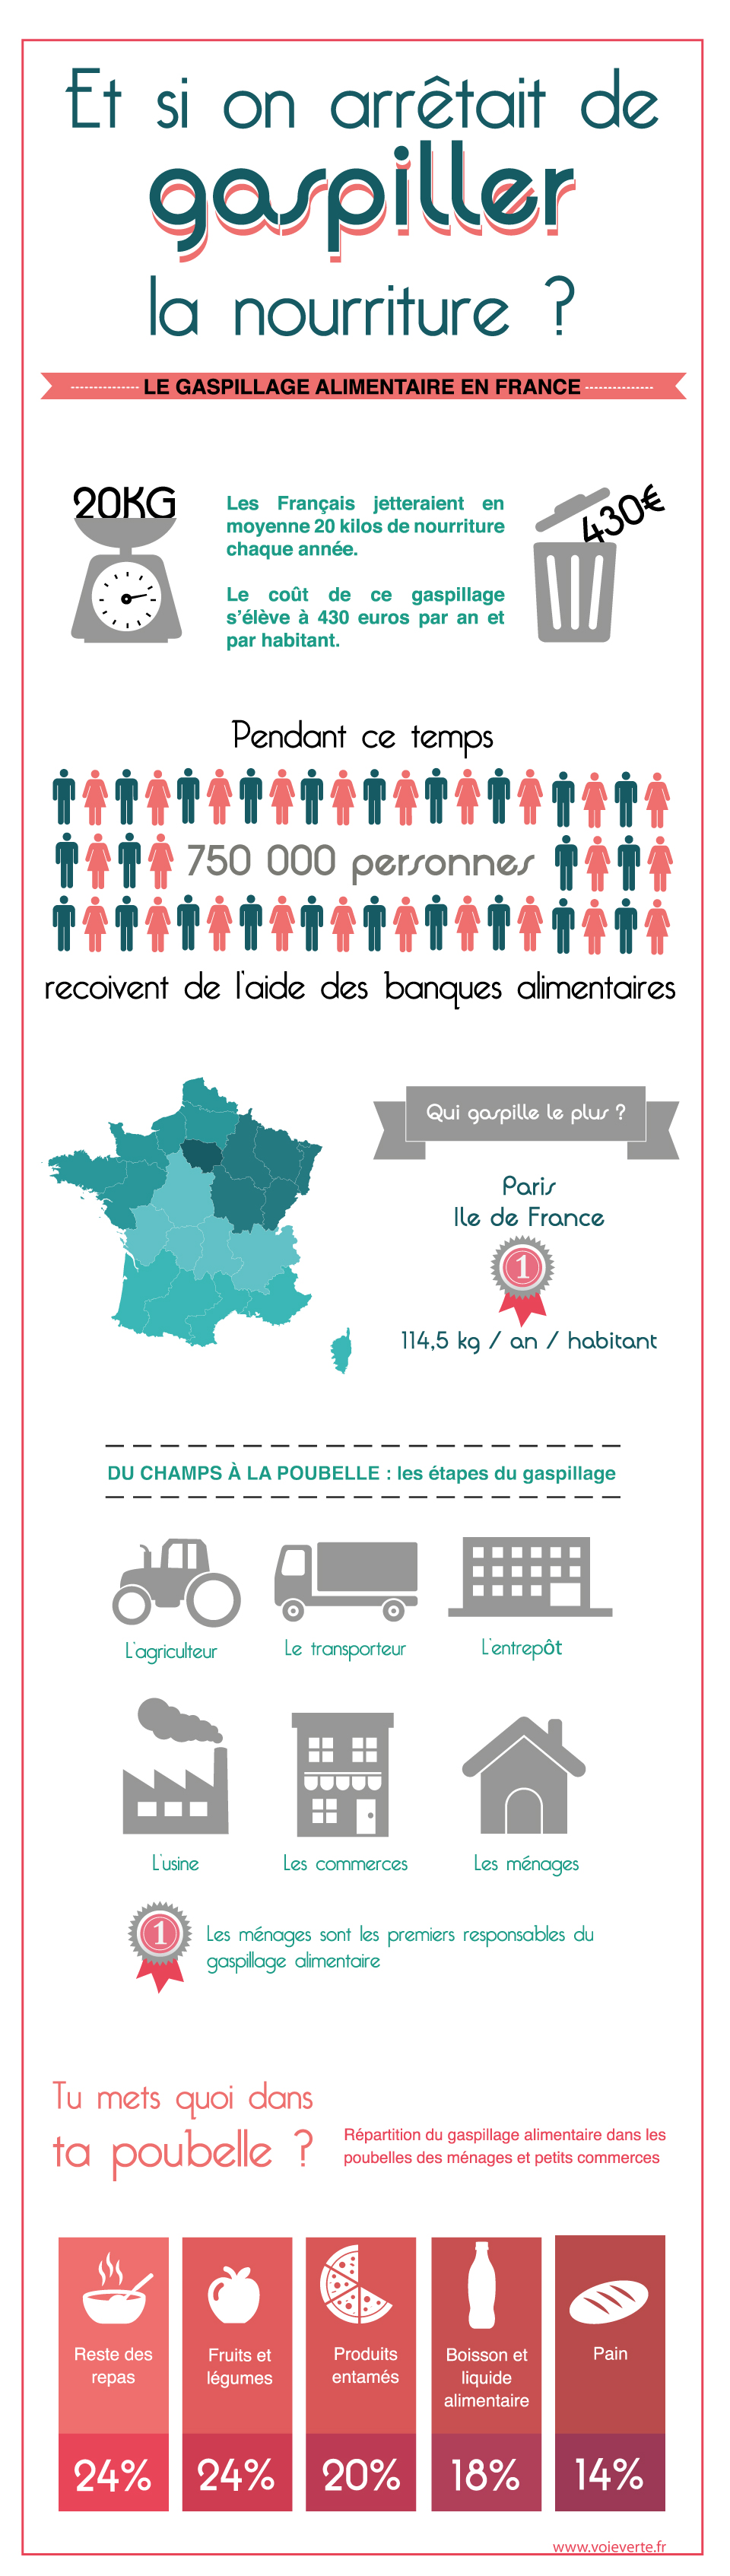 infographie_gaspillage-alimentaire